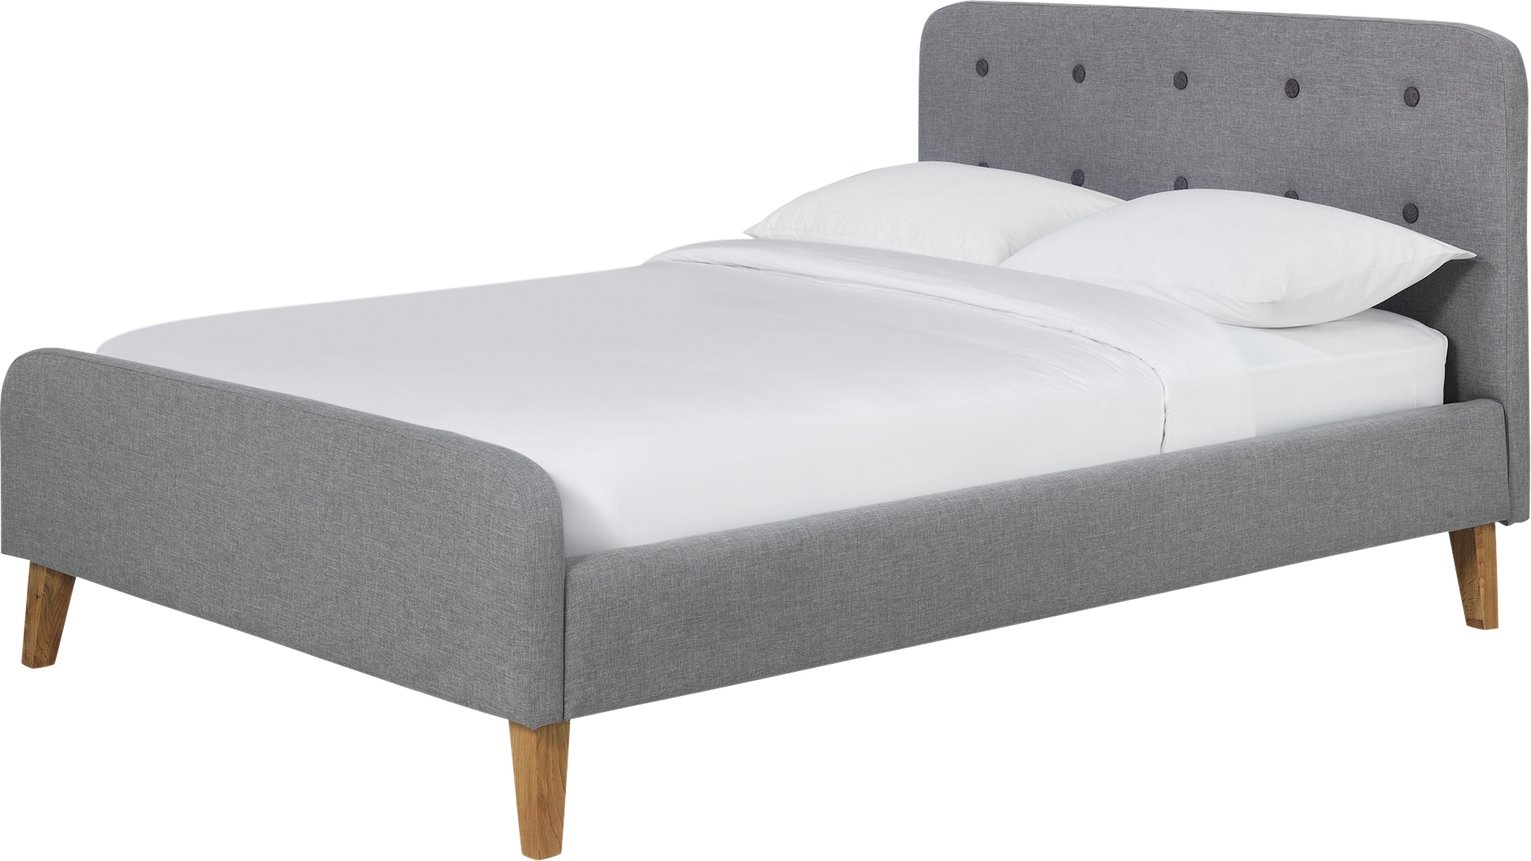 Argos Home Ashby Double Bed Frame - Grey